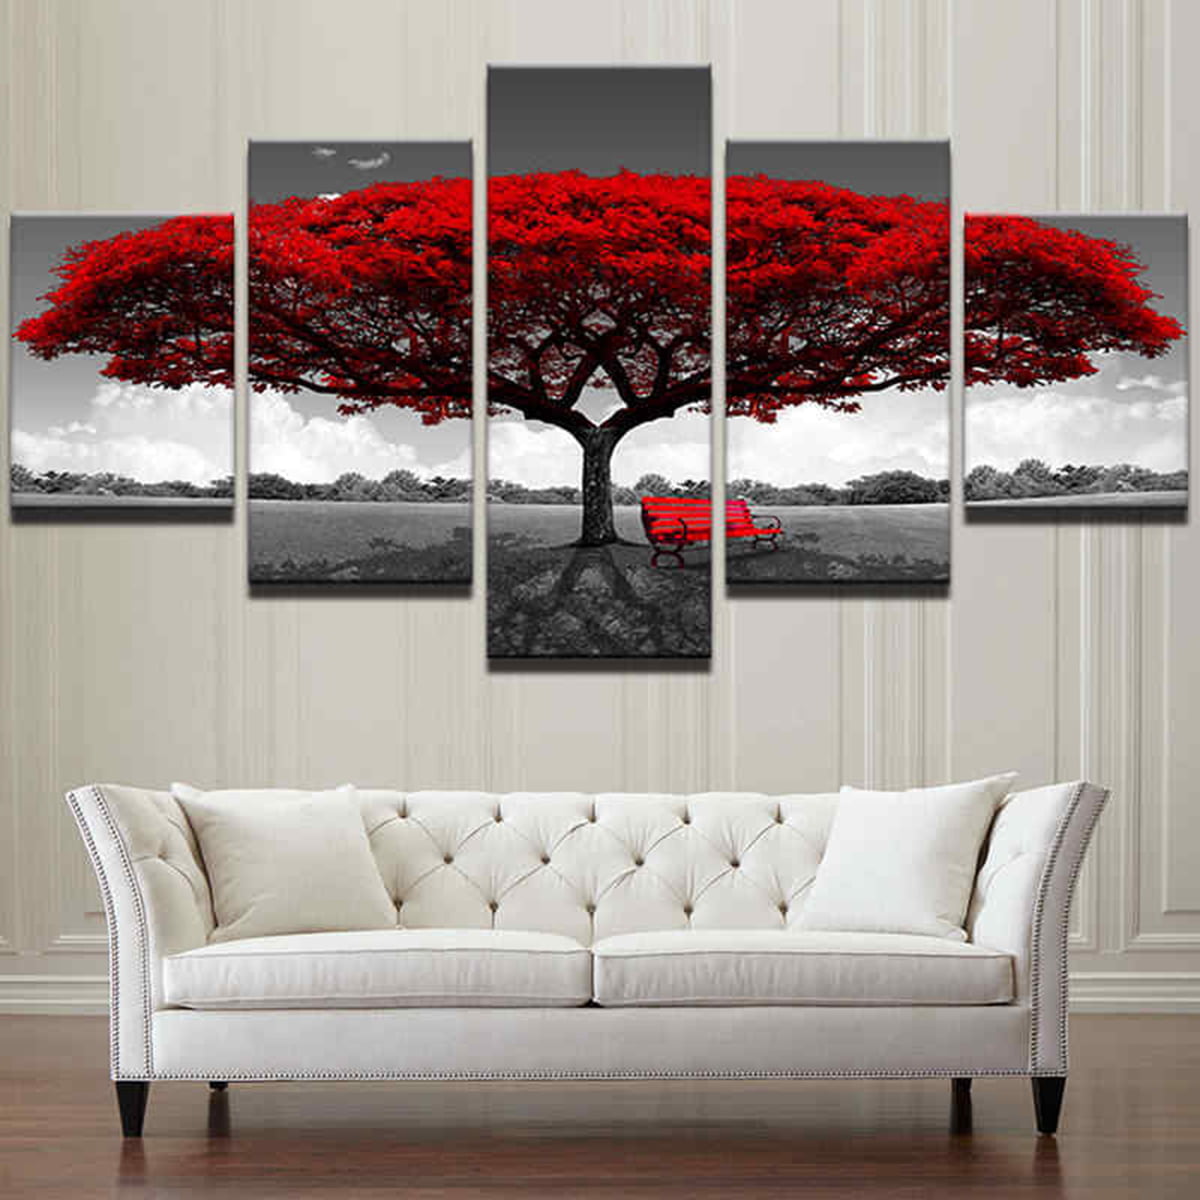 No-Frame Large Wall Art Canvas Painting for Living Room, 12 Pieces